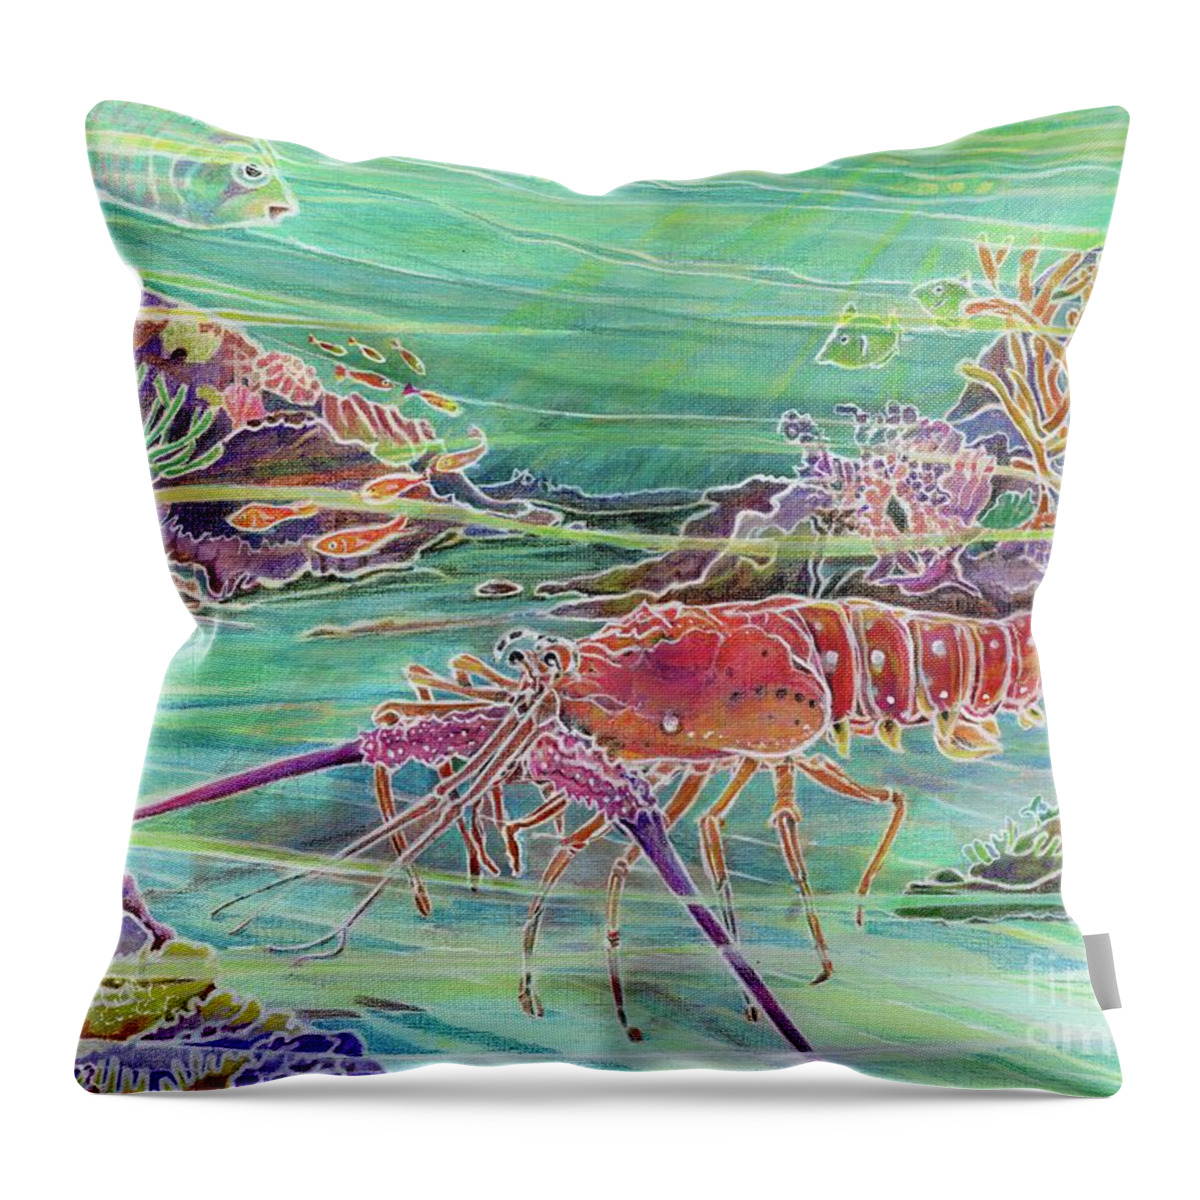 Underwater Throw Pillow featuring the painting Lobster Crossing by Amelia Stephenson at Ameliaworks